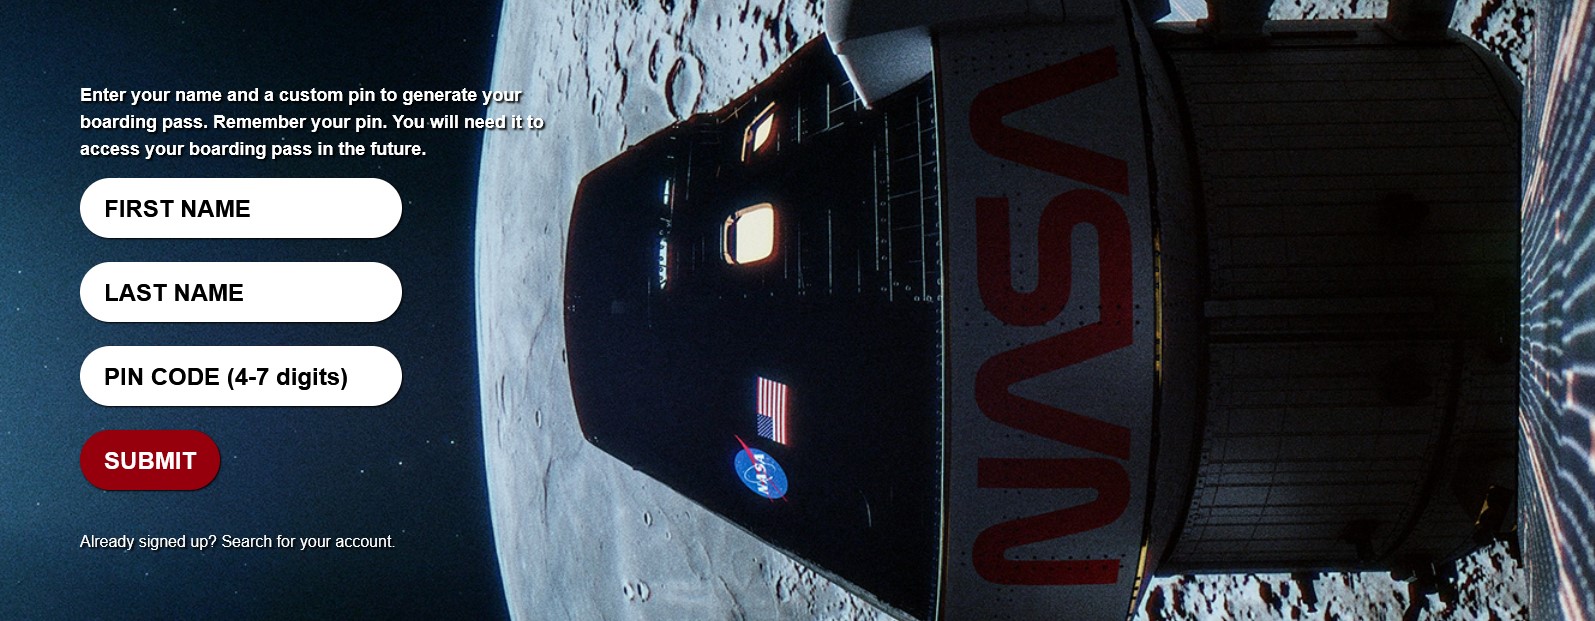 NASA is Letting People Fly Their Name Around the Moon With Artemis 1